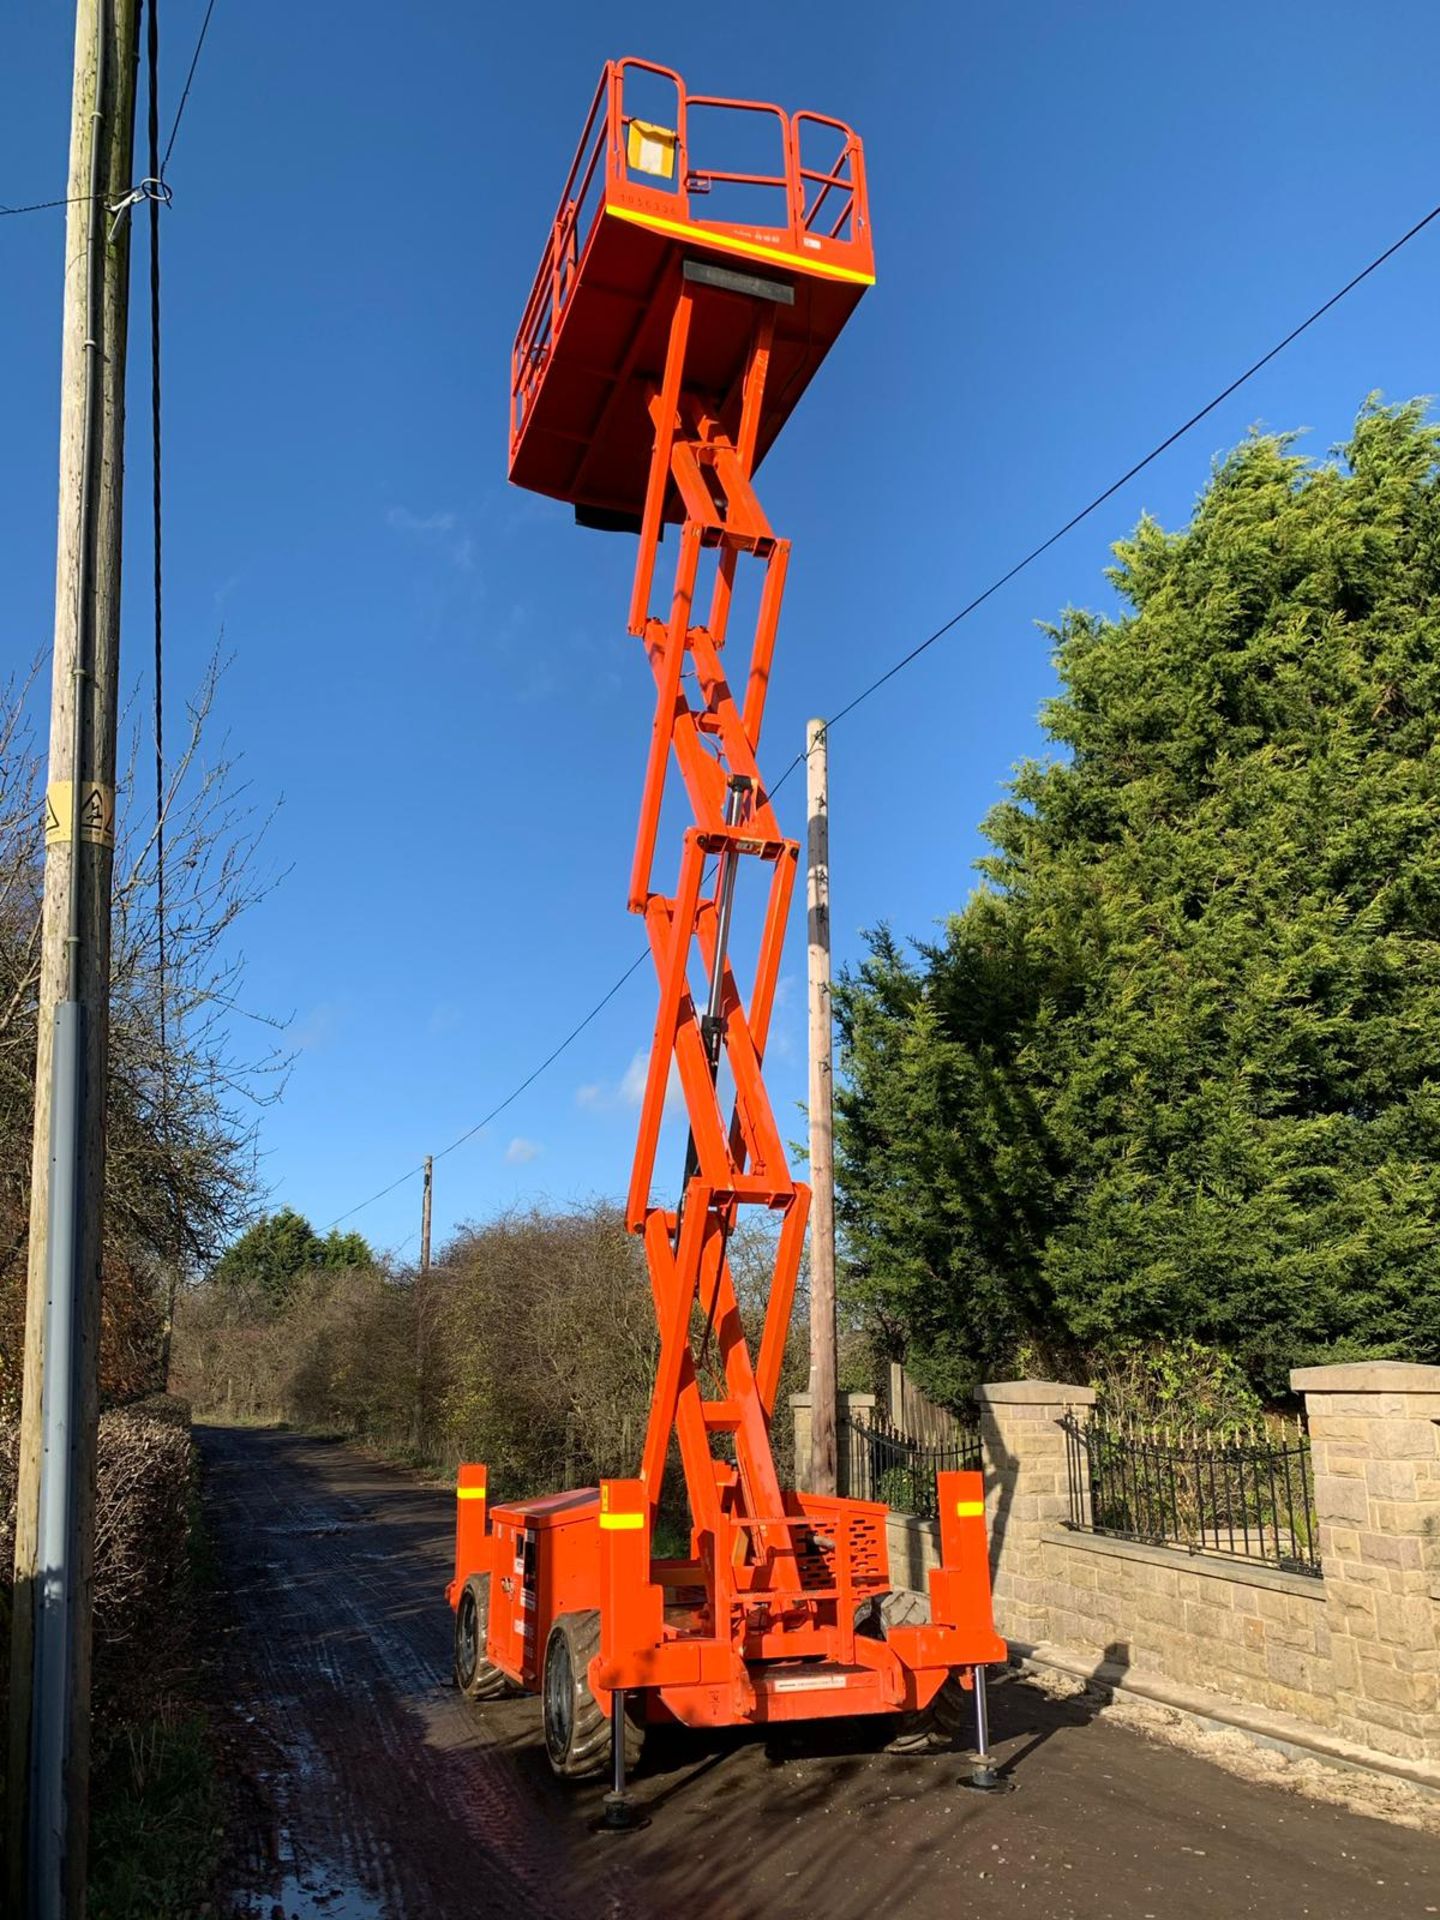 2010 JLG 260MRT SCISSOR LIFT, IN USED BUT GOOD CONDITION, 4WD, LOW 1920 HOURS *PLUS VAT* - Image 8 of 8